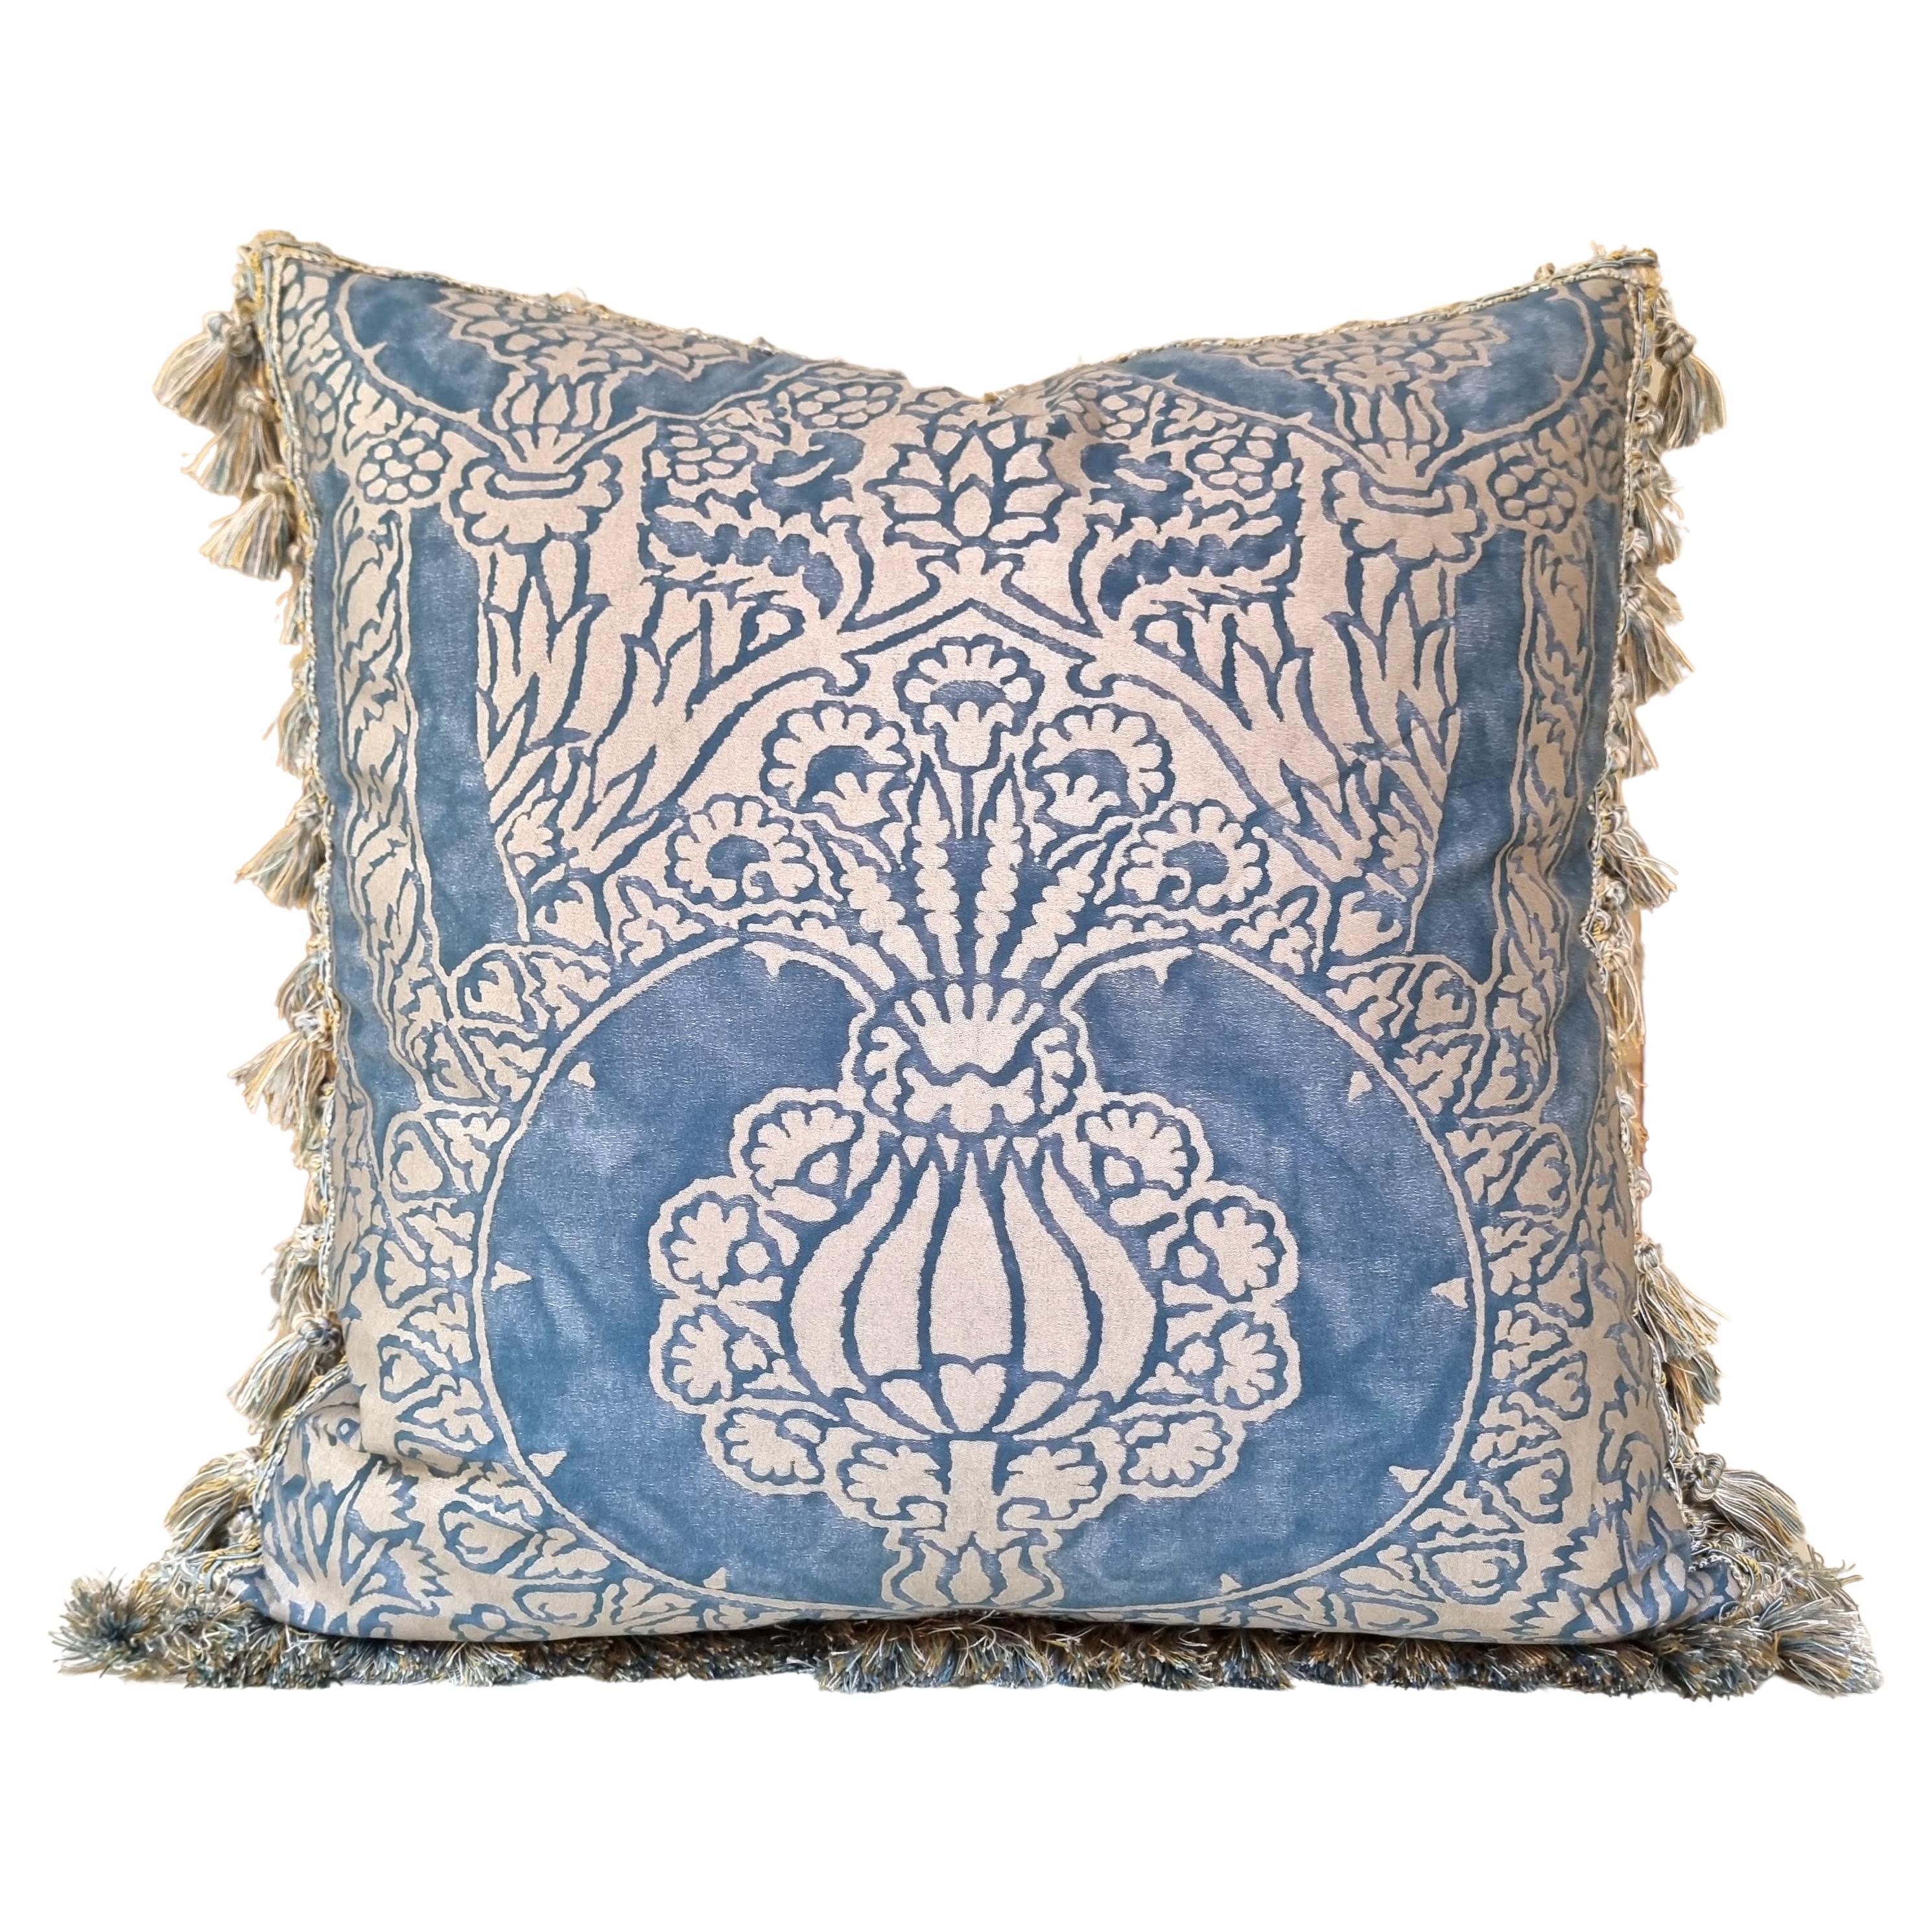 Double Sided Fortuny Fabric Pillow Tassel Trim Blue Silvery Gold Nicolo Pattern